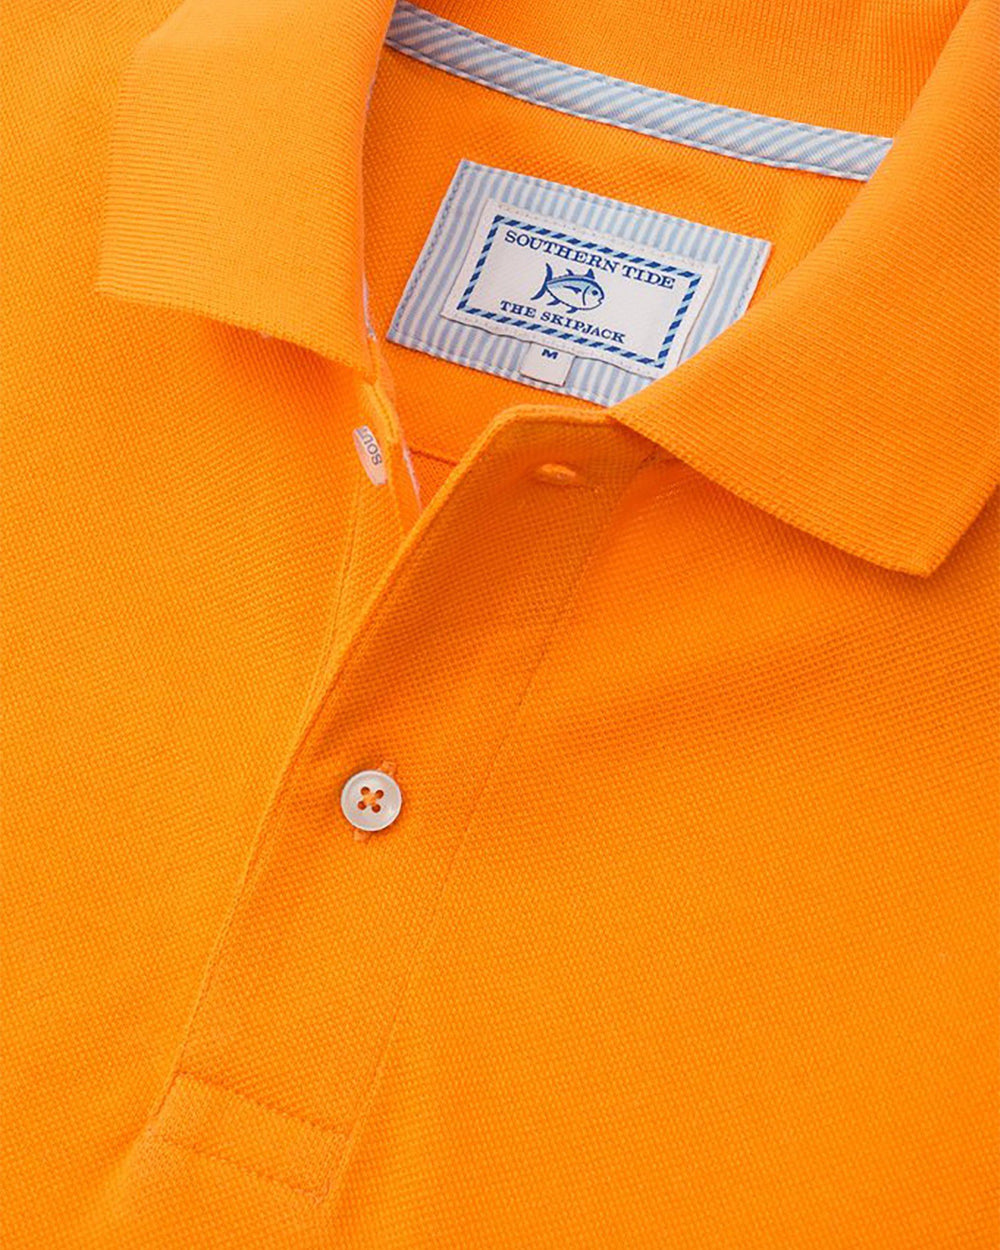 The detail of the Men's Orange Tennessee Vols Pique Polo Shirt by Southern Tide - Rocky Top Orange